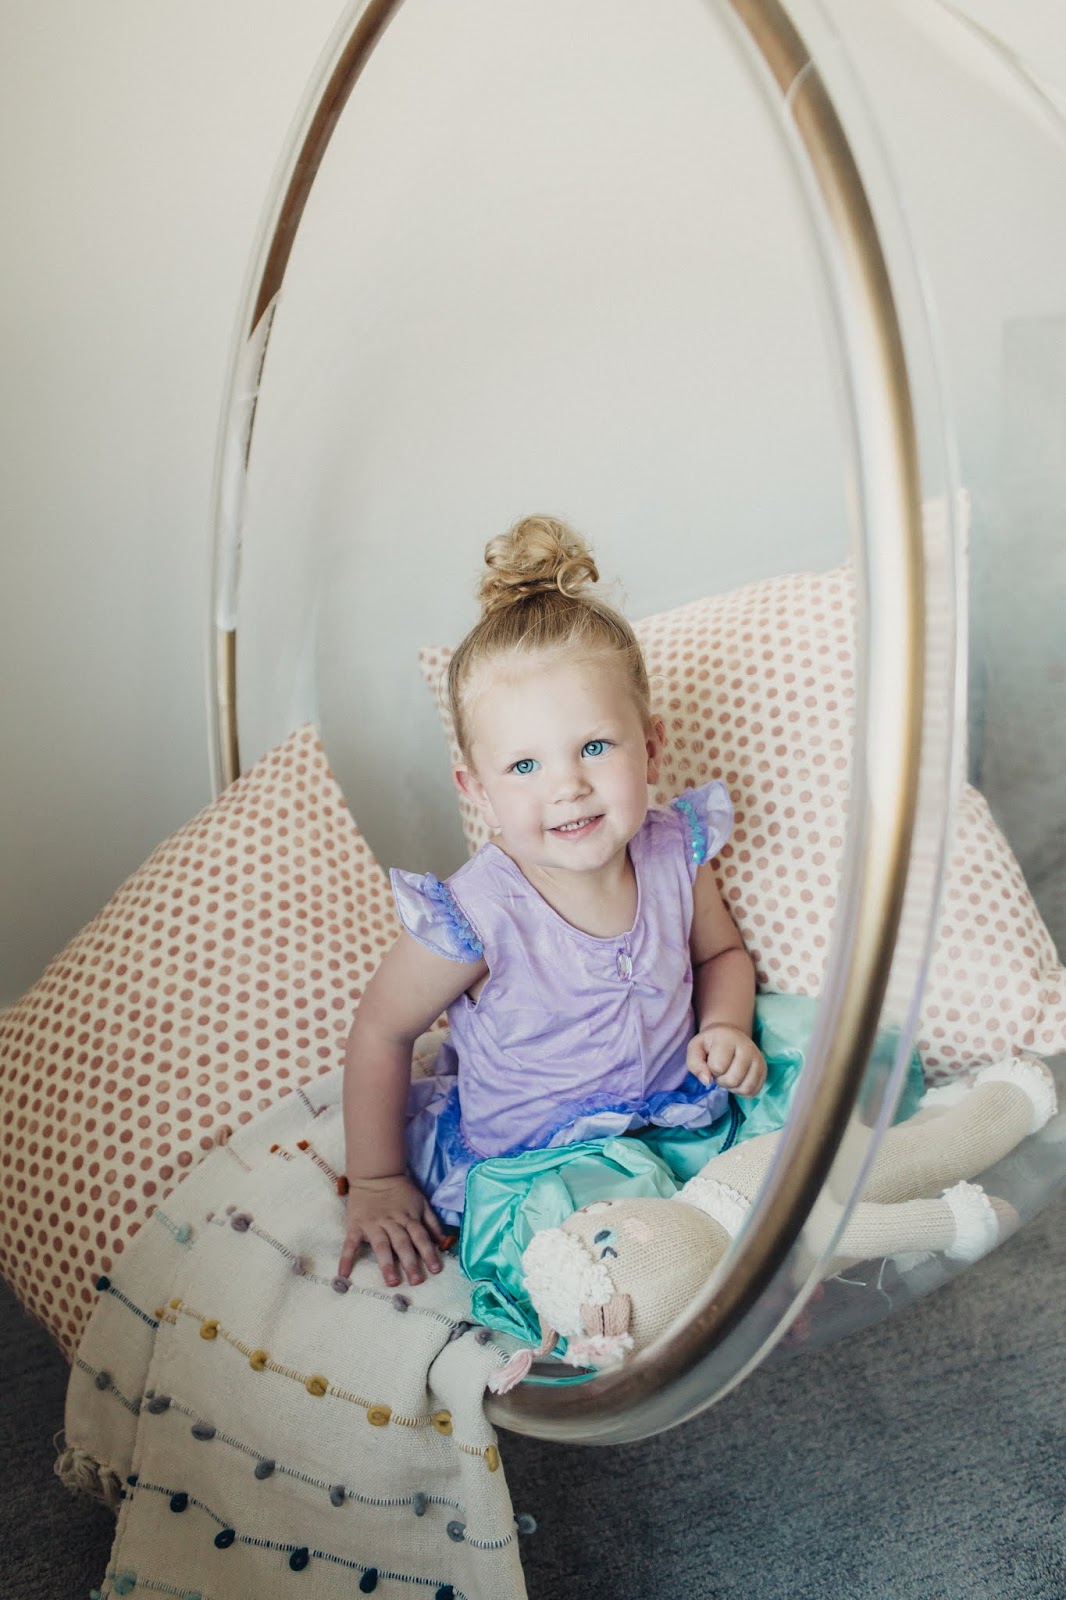 MAKE BELIEVE WITH LITTLE ADVENTURES DRESS UP | The Red Closet Diary